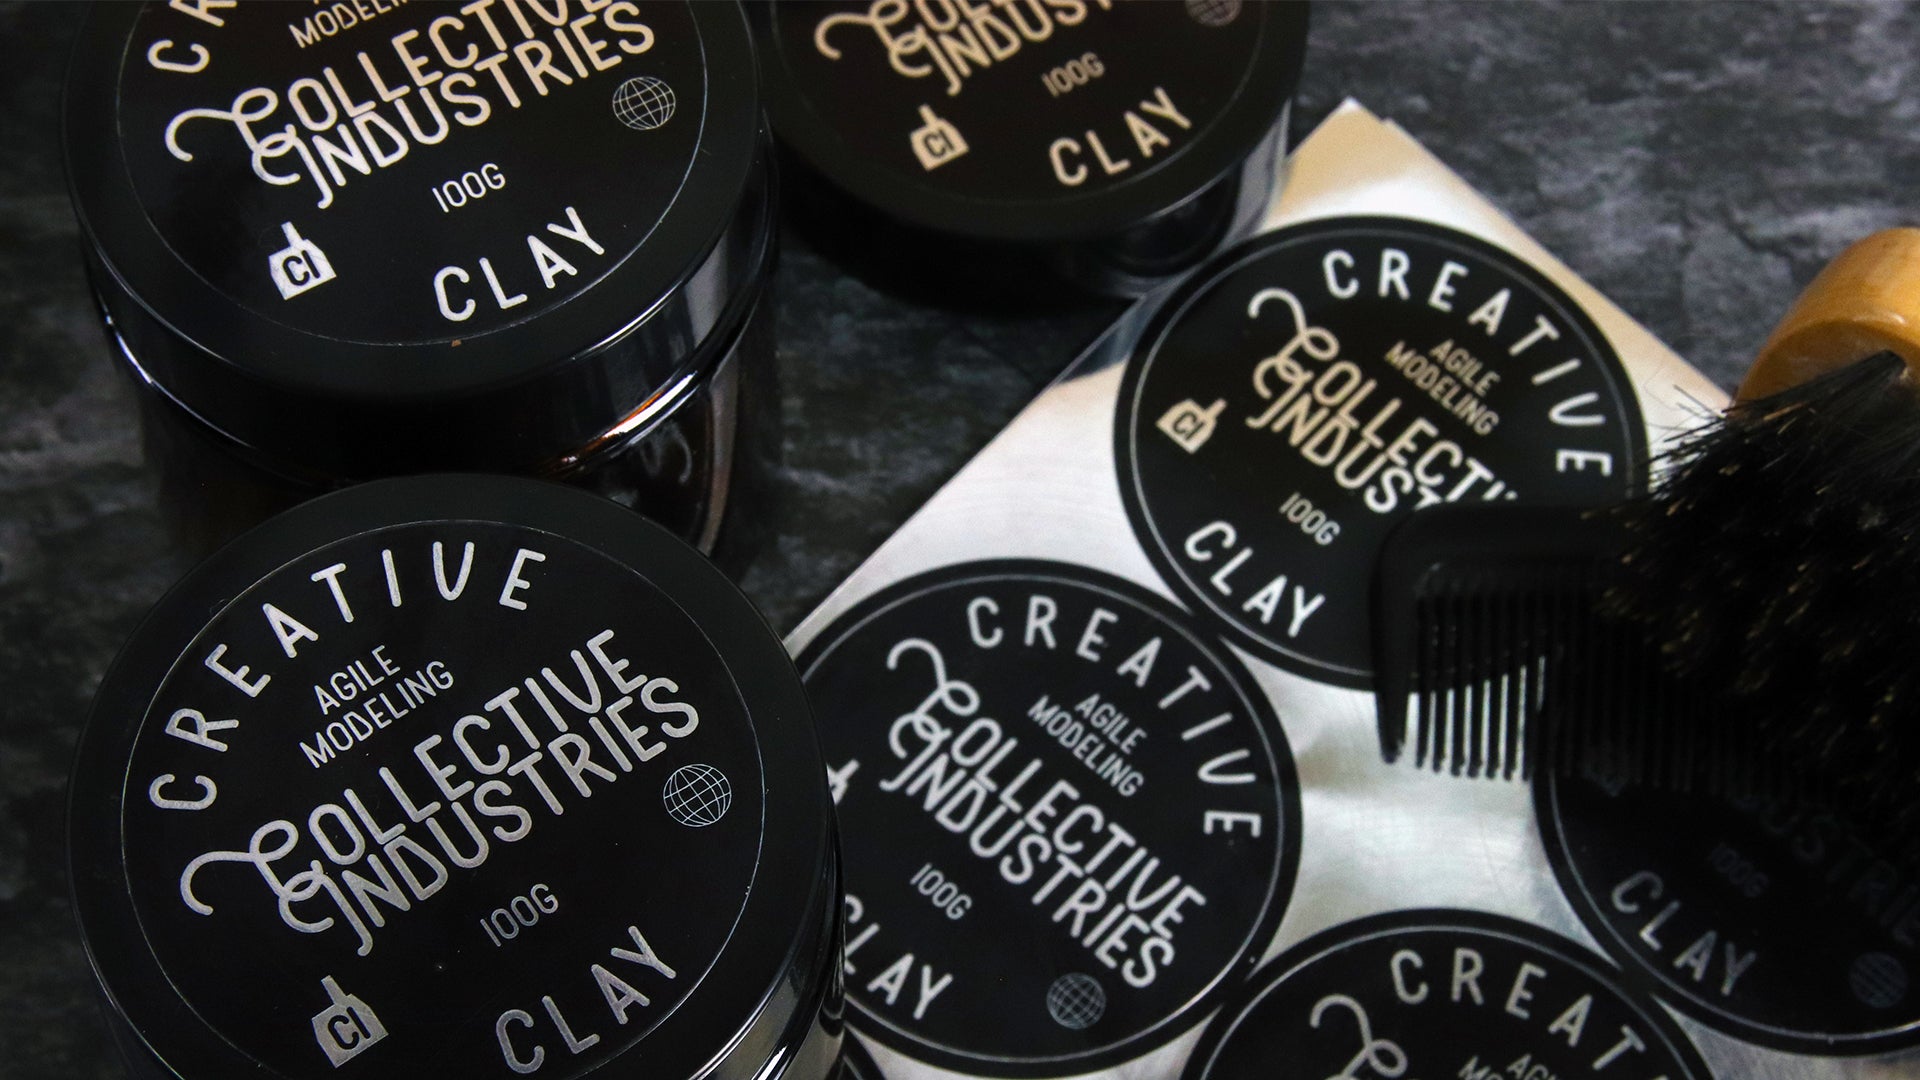 Circle mirror silver labels applied to black tins containing hair care next to a sheet